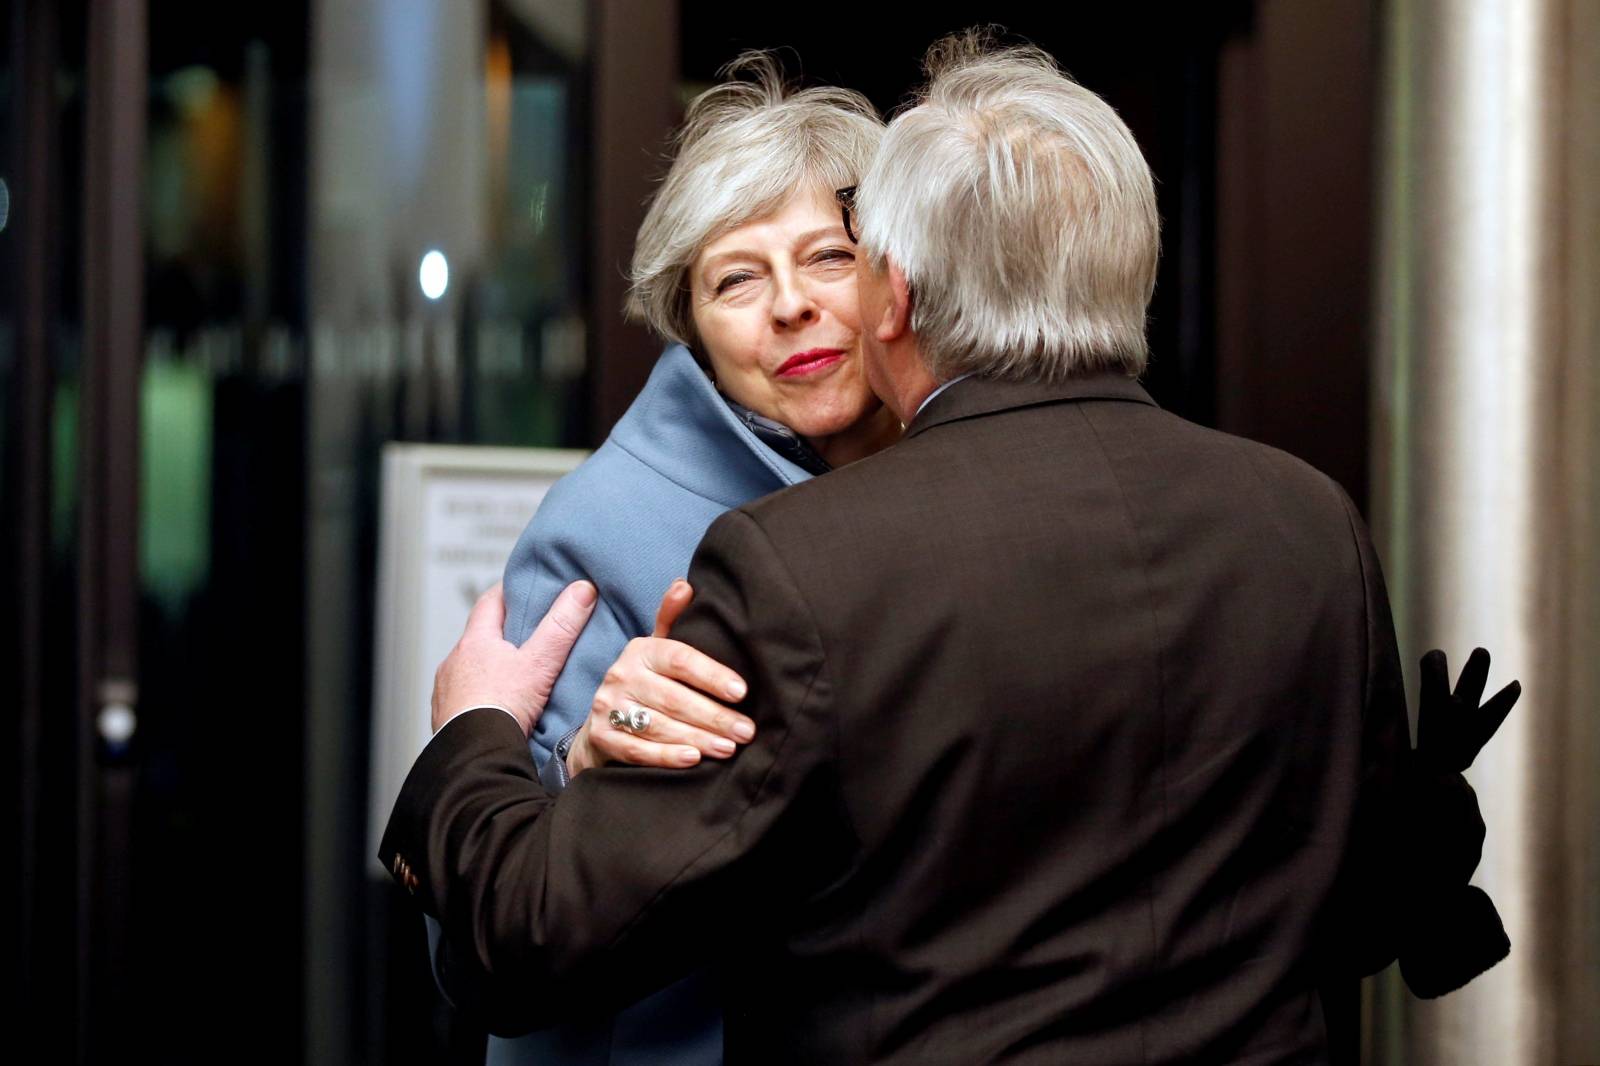 British Prime Minister Theresa May meets with European Commission President Jean-Claude Juncker in Strasbourg